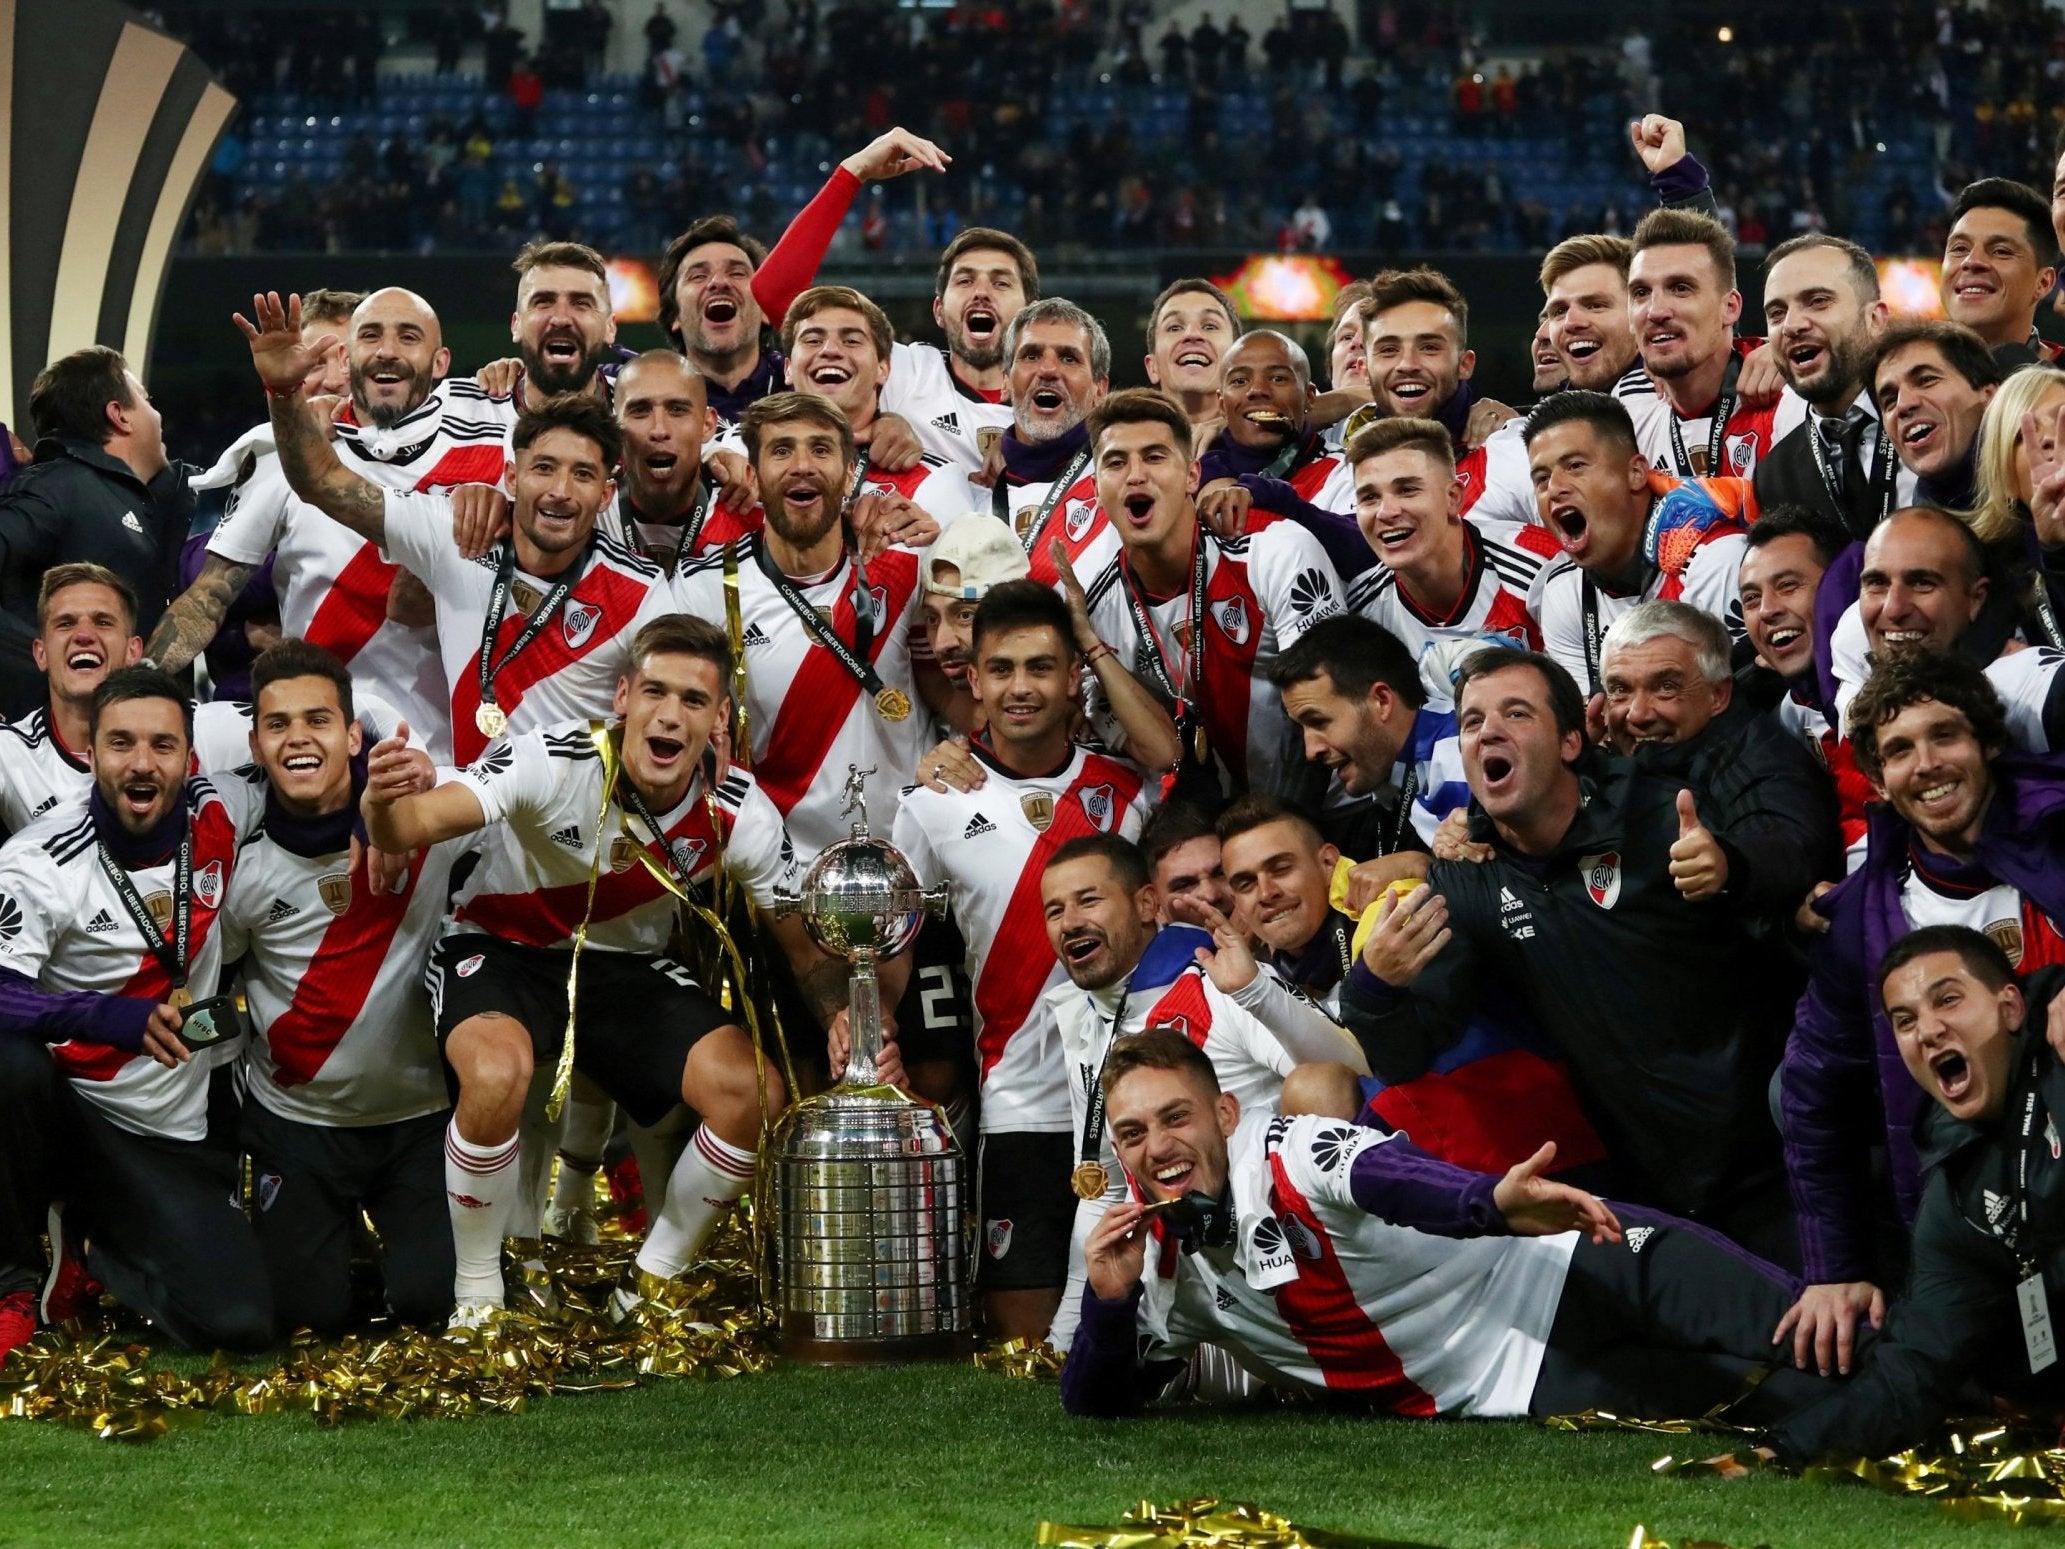 Copa Libertadores final dates confirmed for mouthwatering River Plate vs  Boca Juniors clash that will see fierce Argentinian rivals go head-to-head